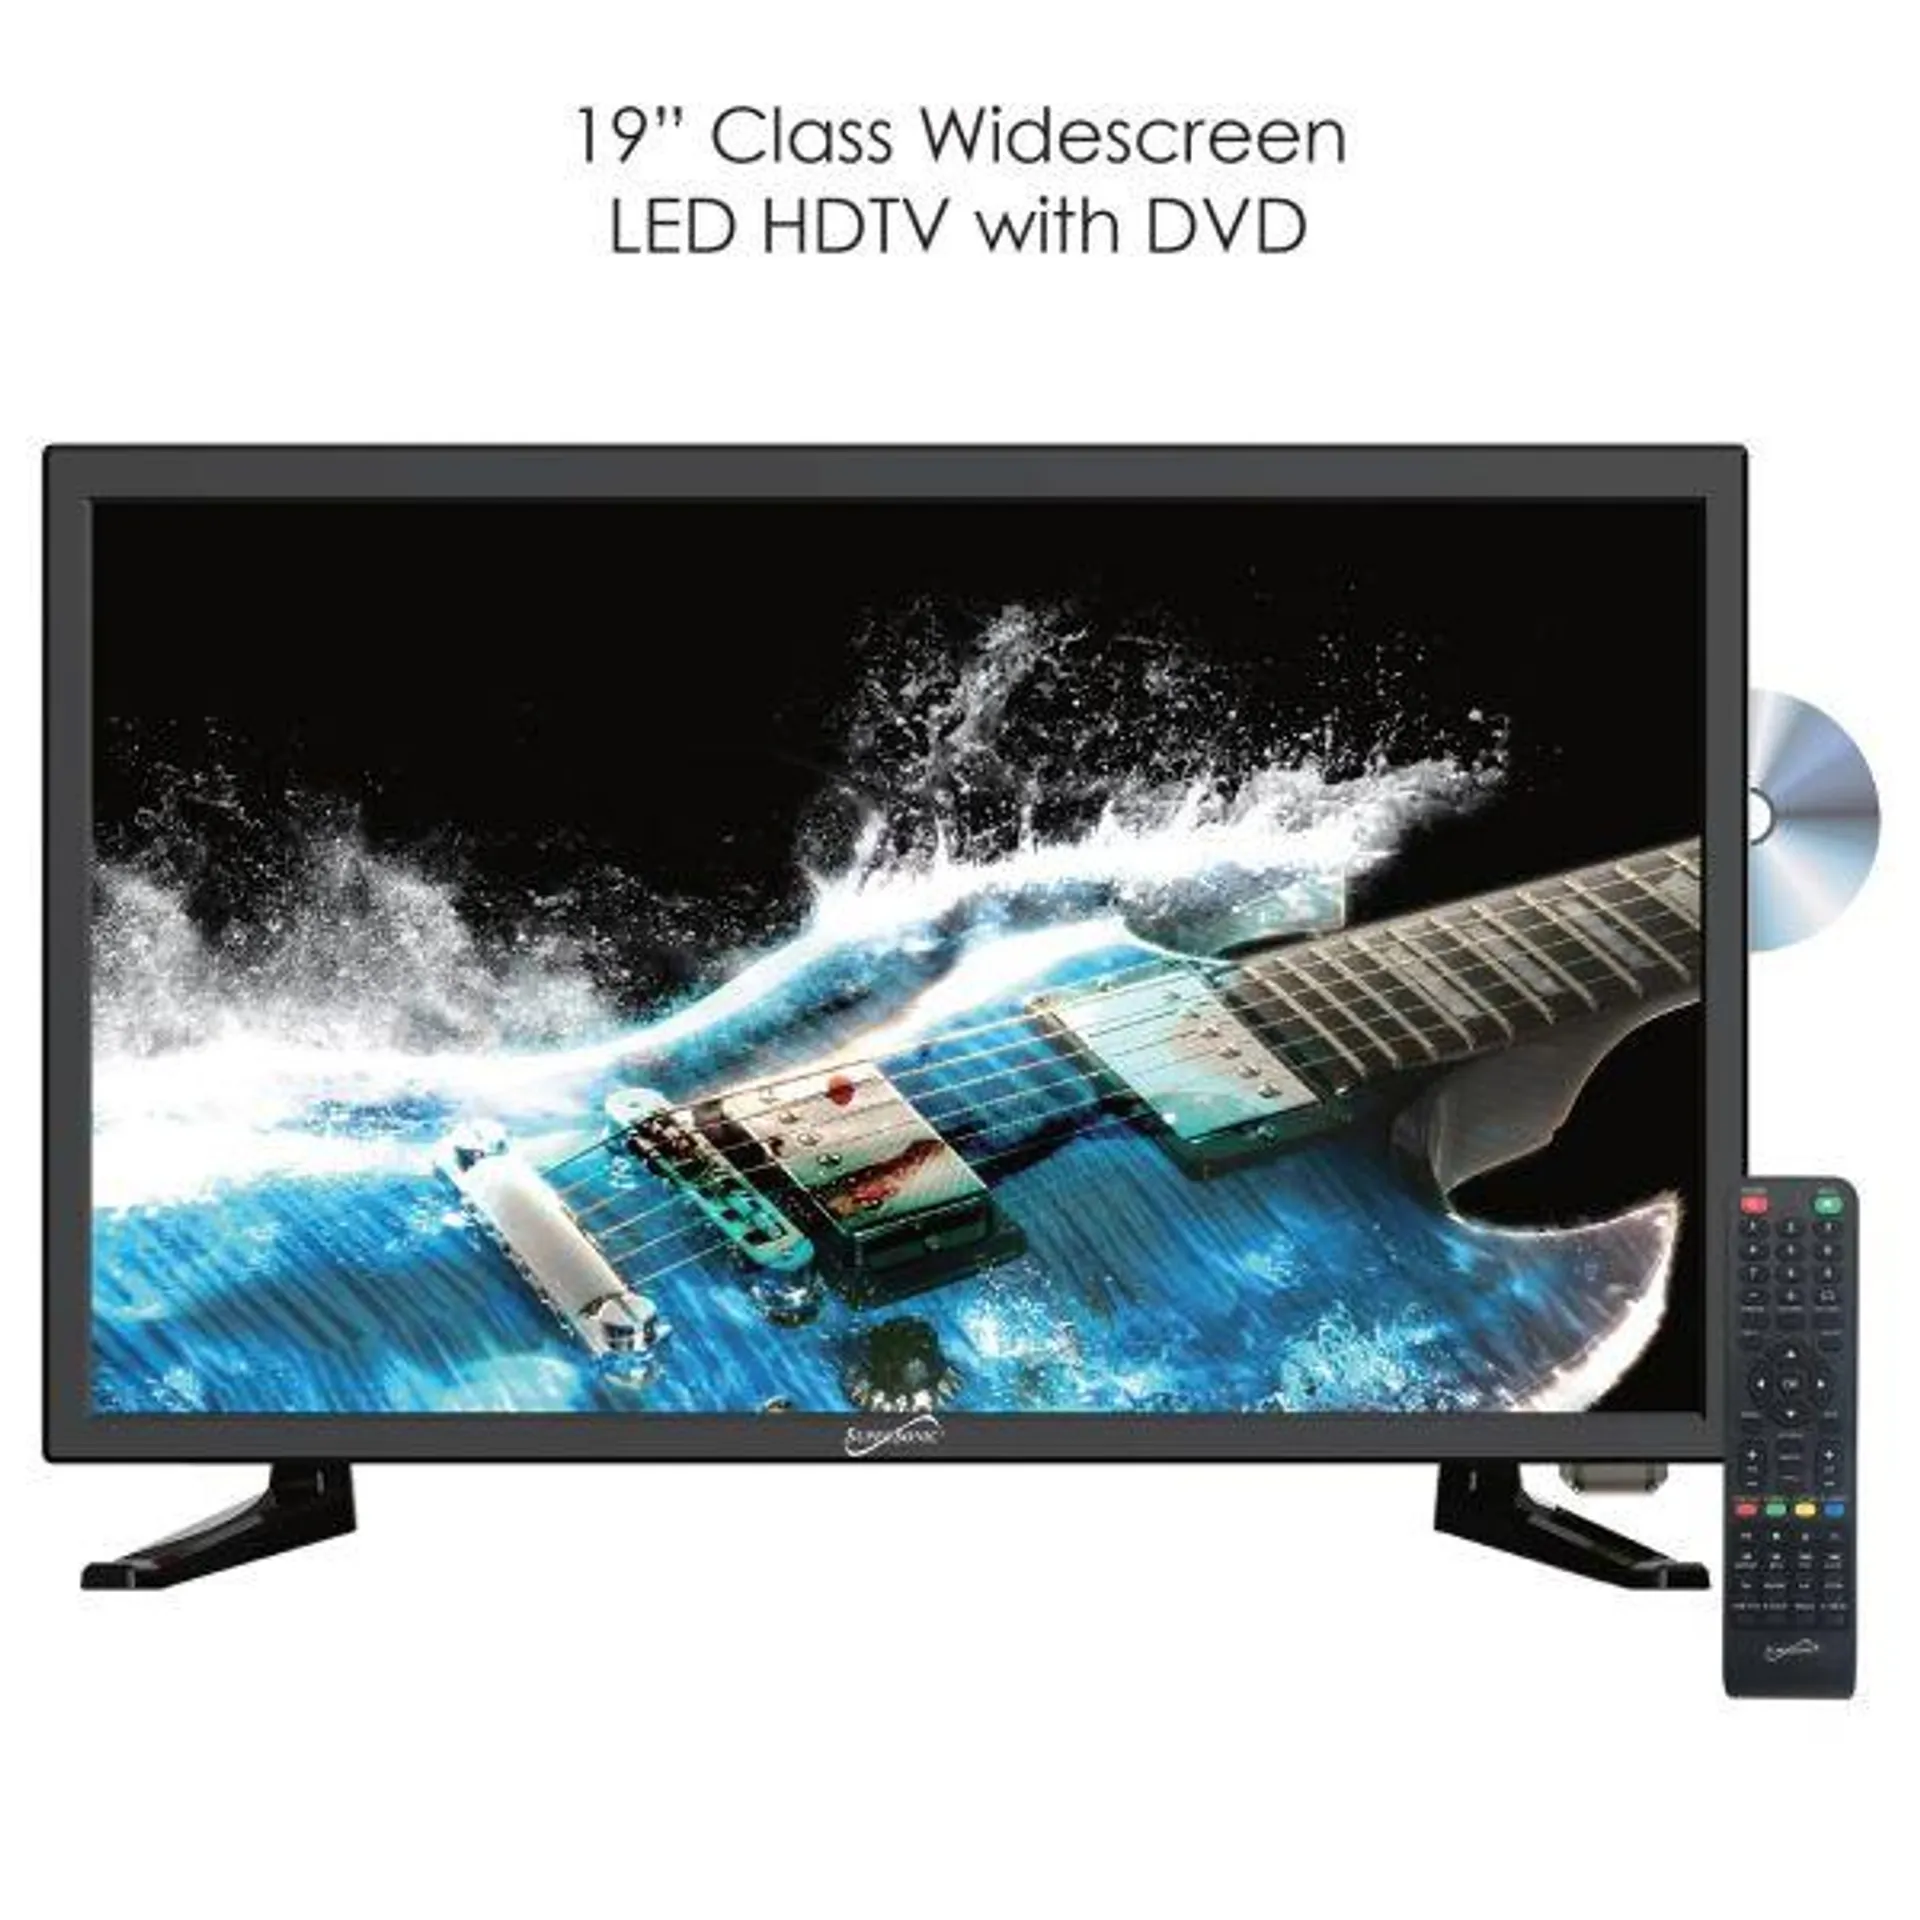 SuperSonic 19 Inch LED HDTV with Built-in DVD Player